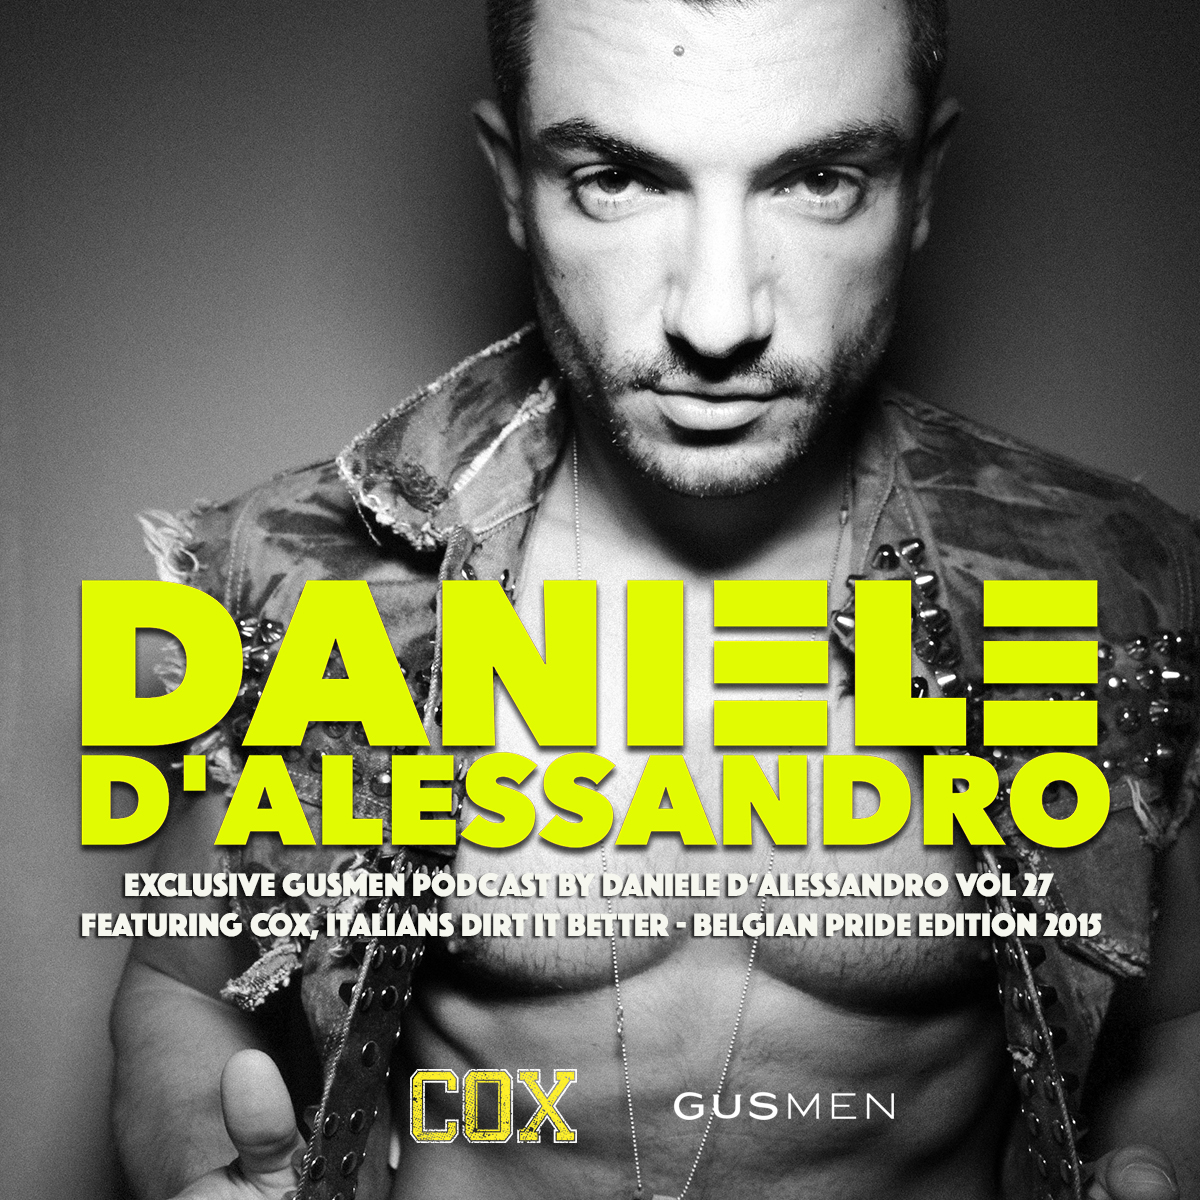 GUSMEN - Exclusive GUSMEN Podcast by Daniele D'ALESSANDRO featuring COX ...